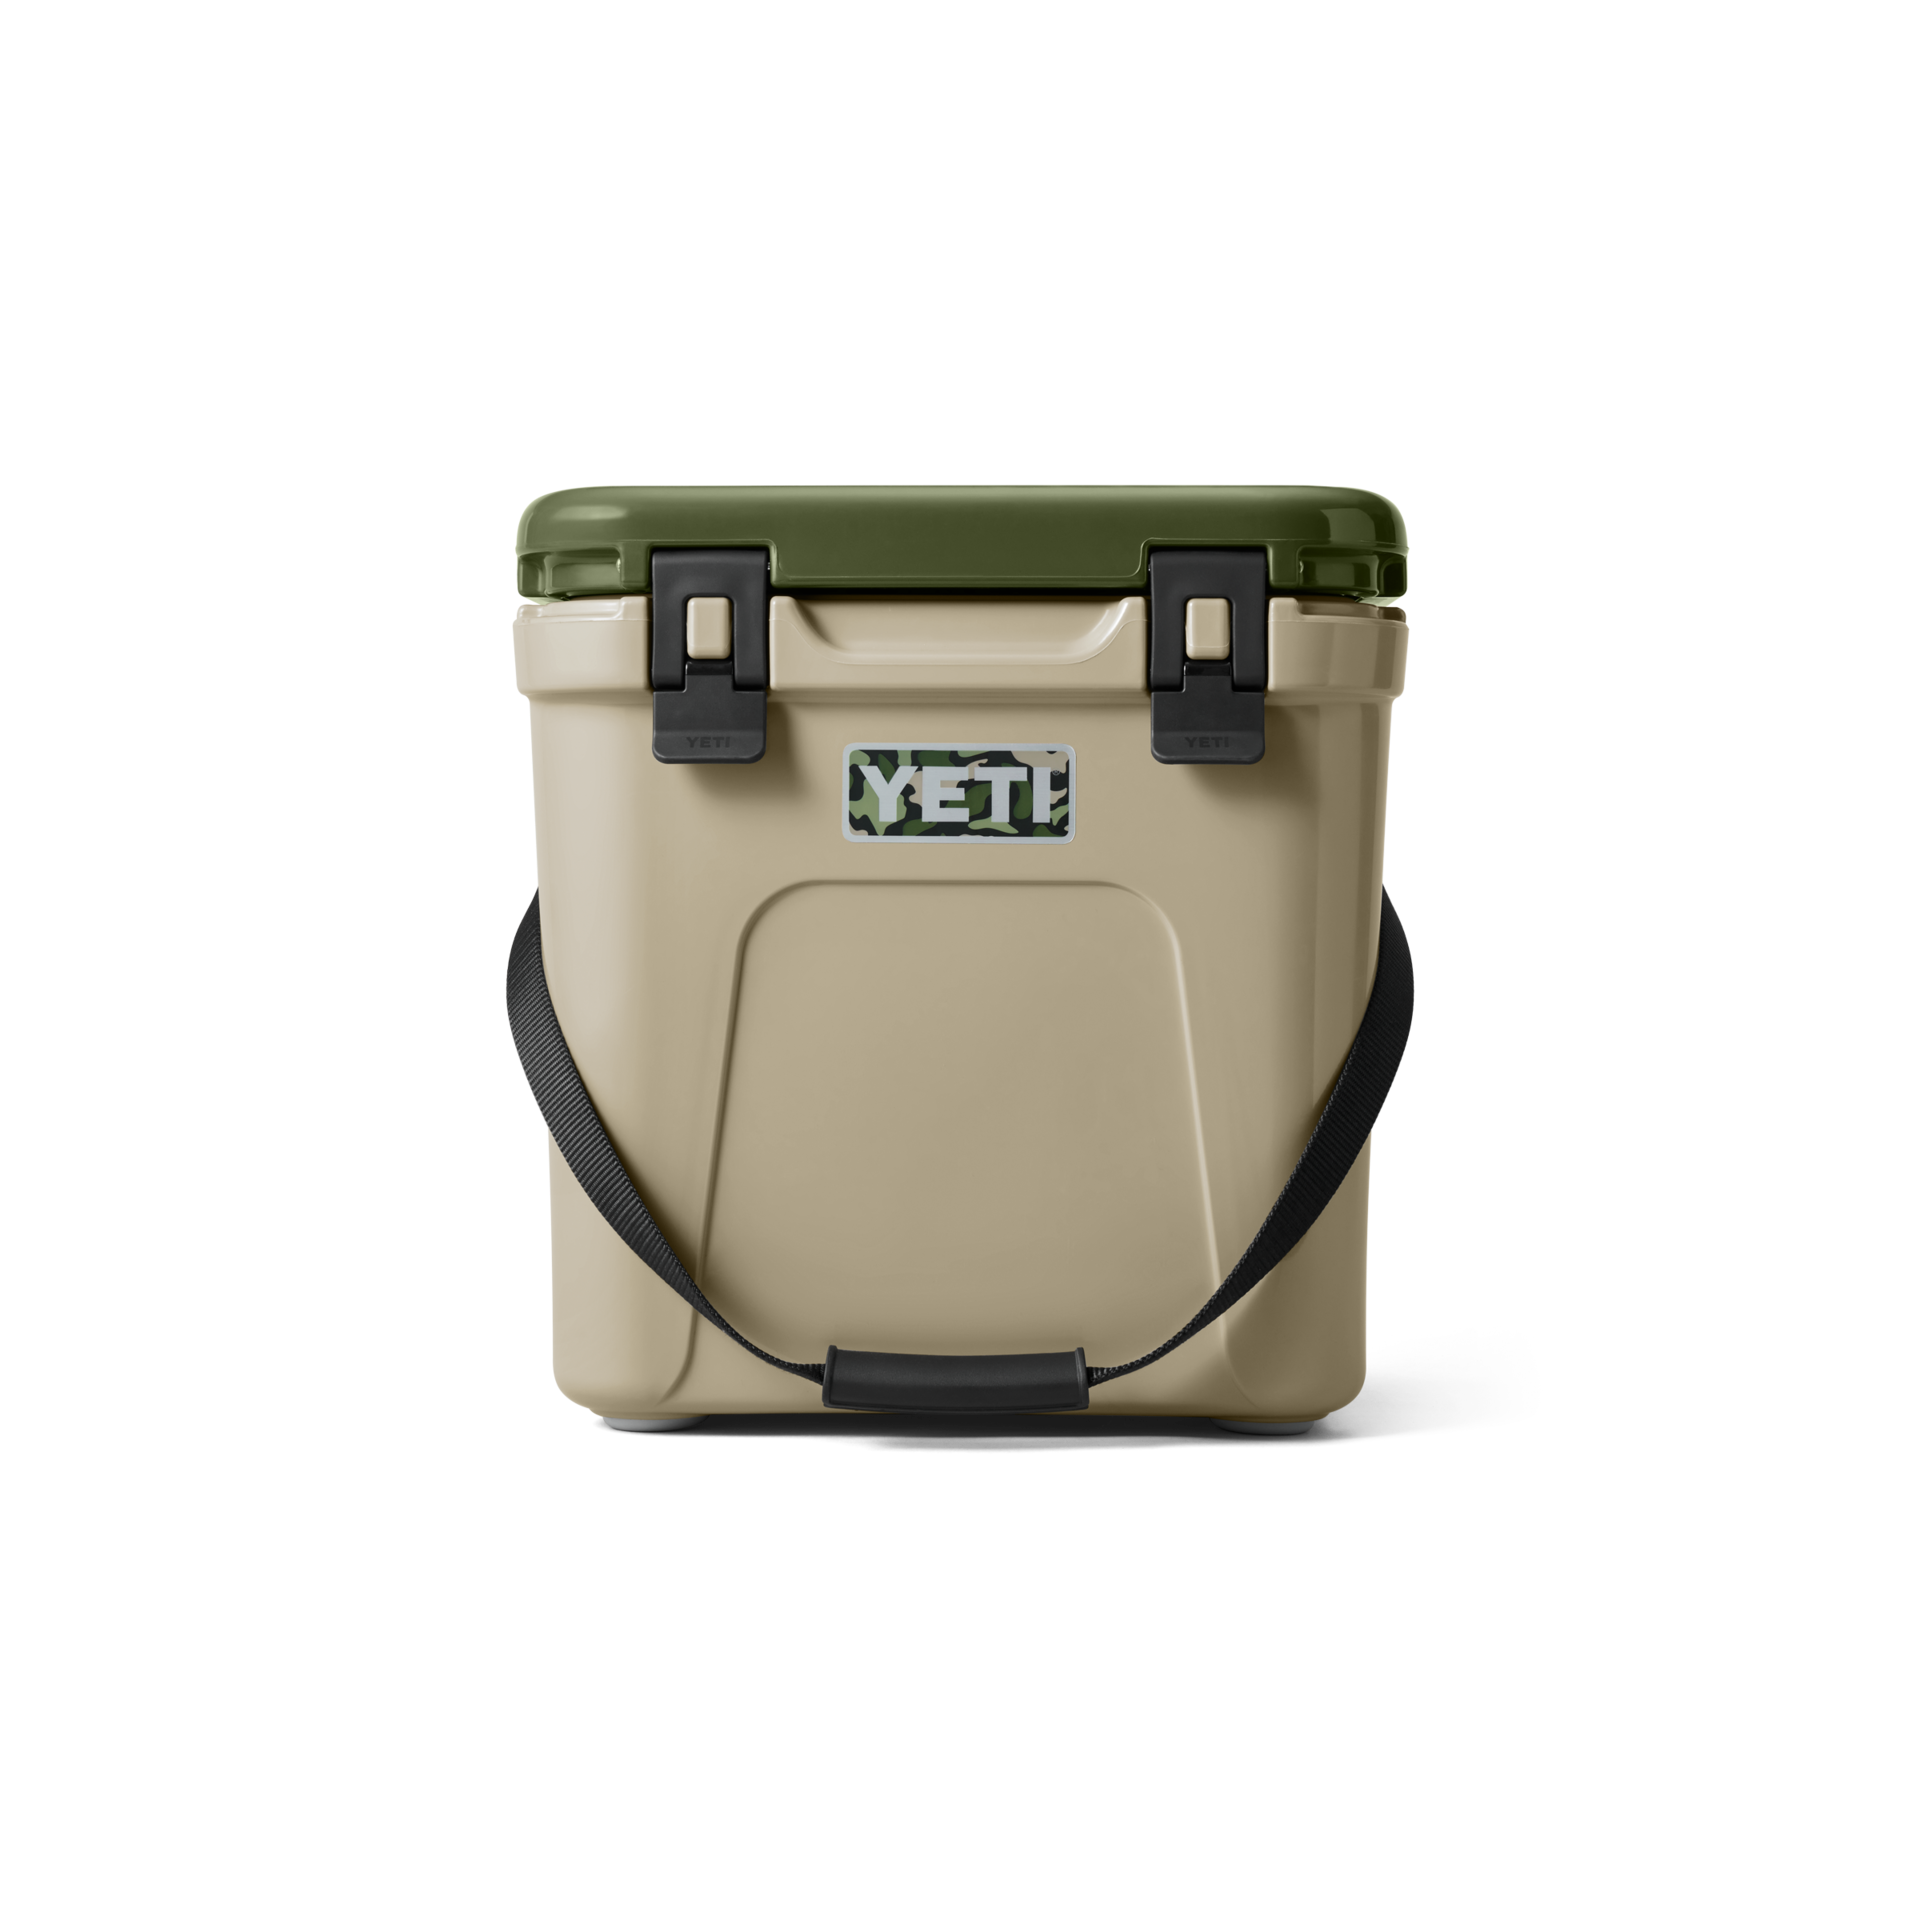 Yeti, Roadie, Cooler, Hard Cooler, Limited, Decoy, Hunting, Camo, Limited Edition